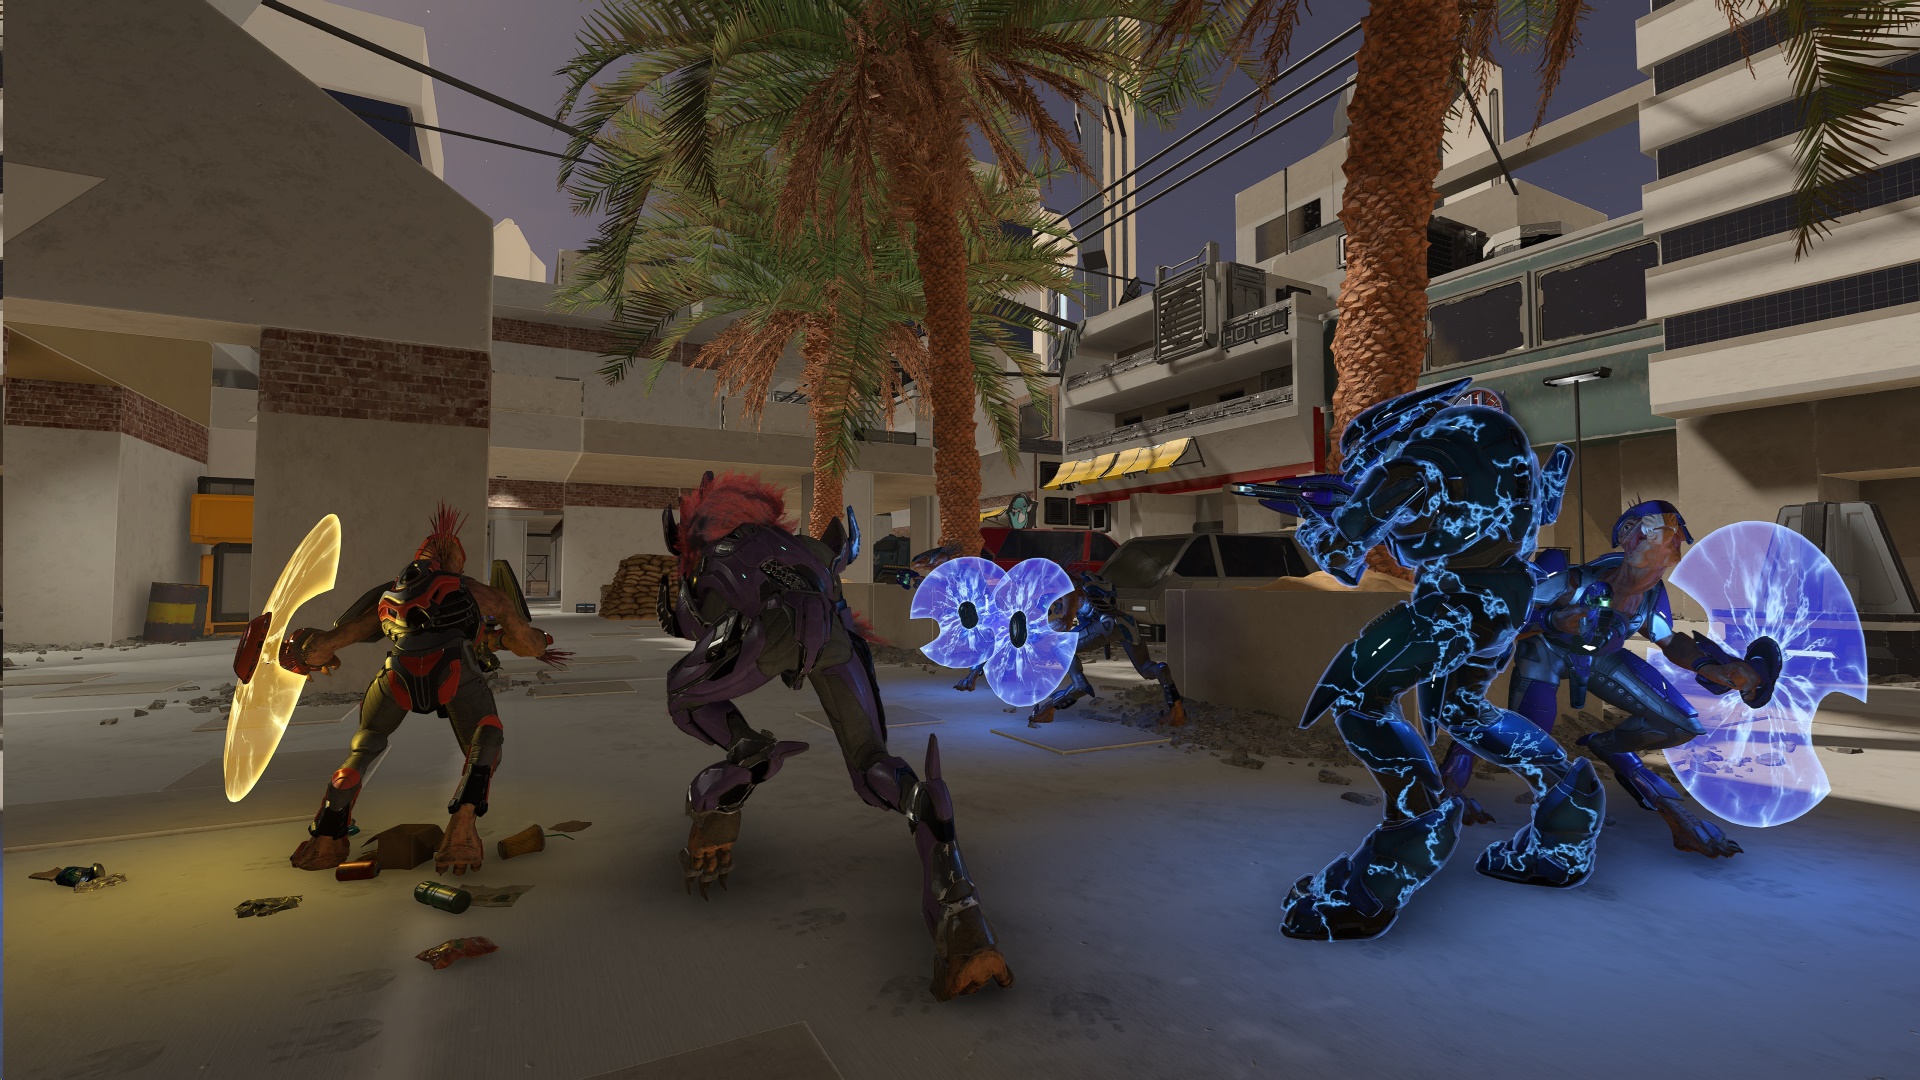 Halo Infinite screenshot of Jackals, Skirmishers, and Elites in the Halo 2 Outskirts courtyard created in Forge